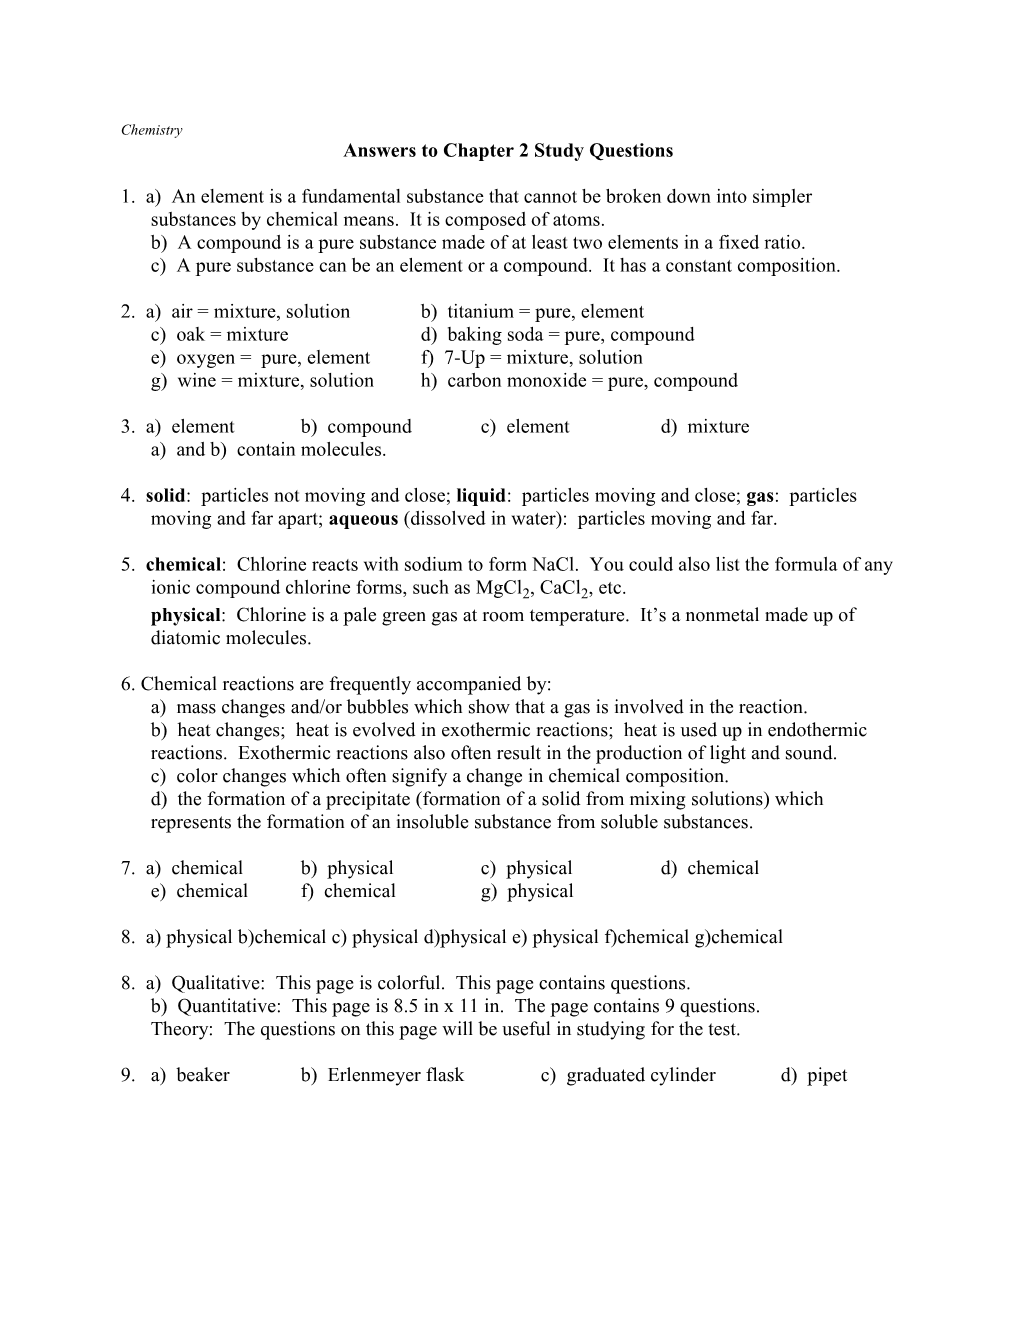 Answers to Chapter 2 Study Questions